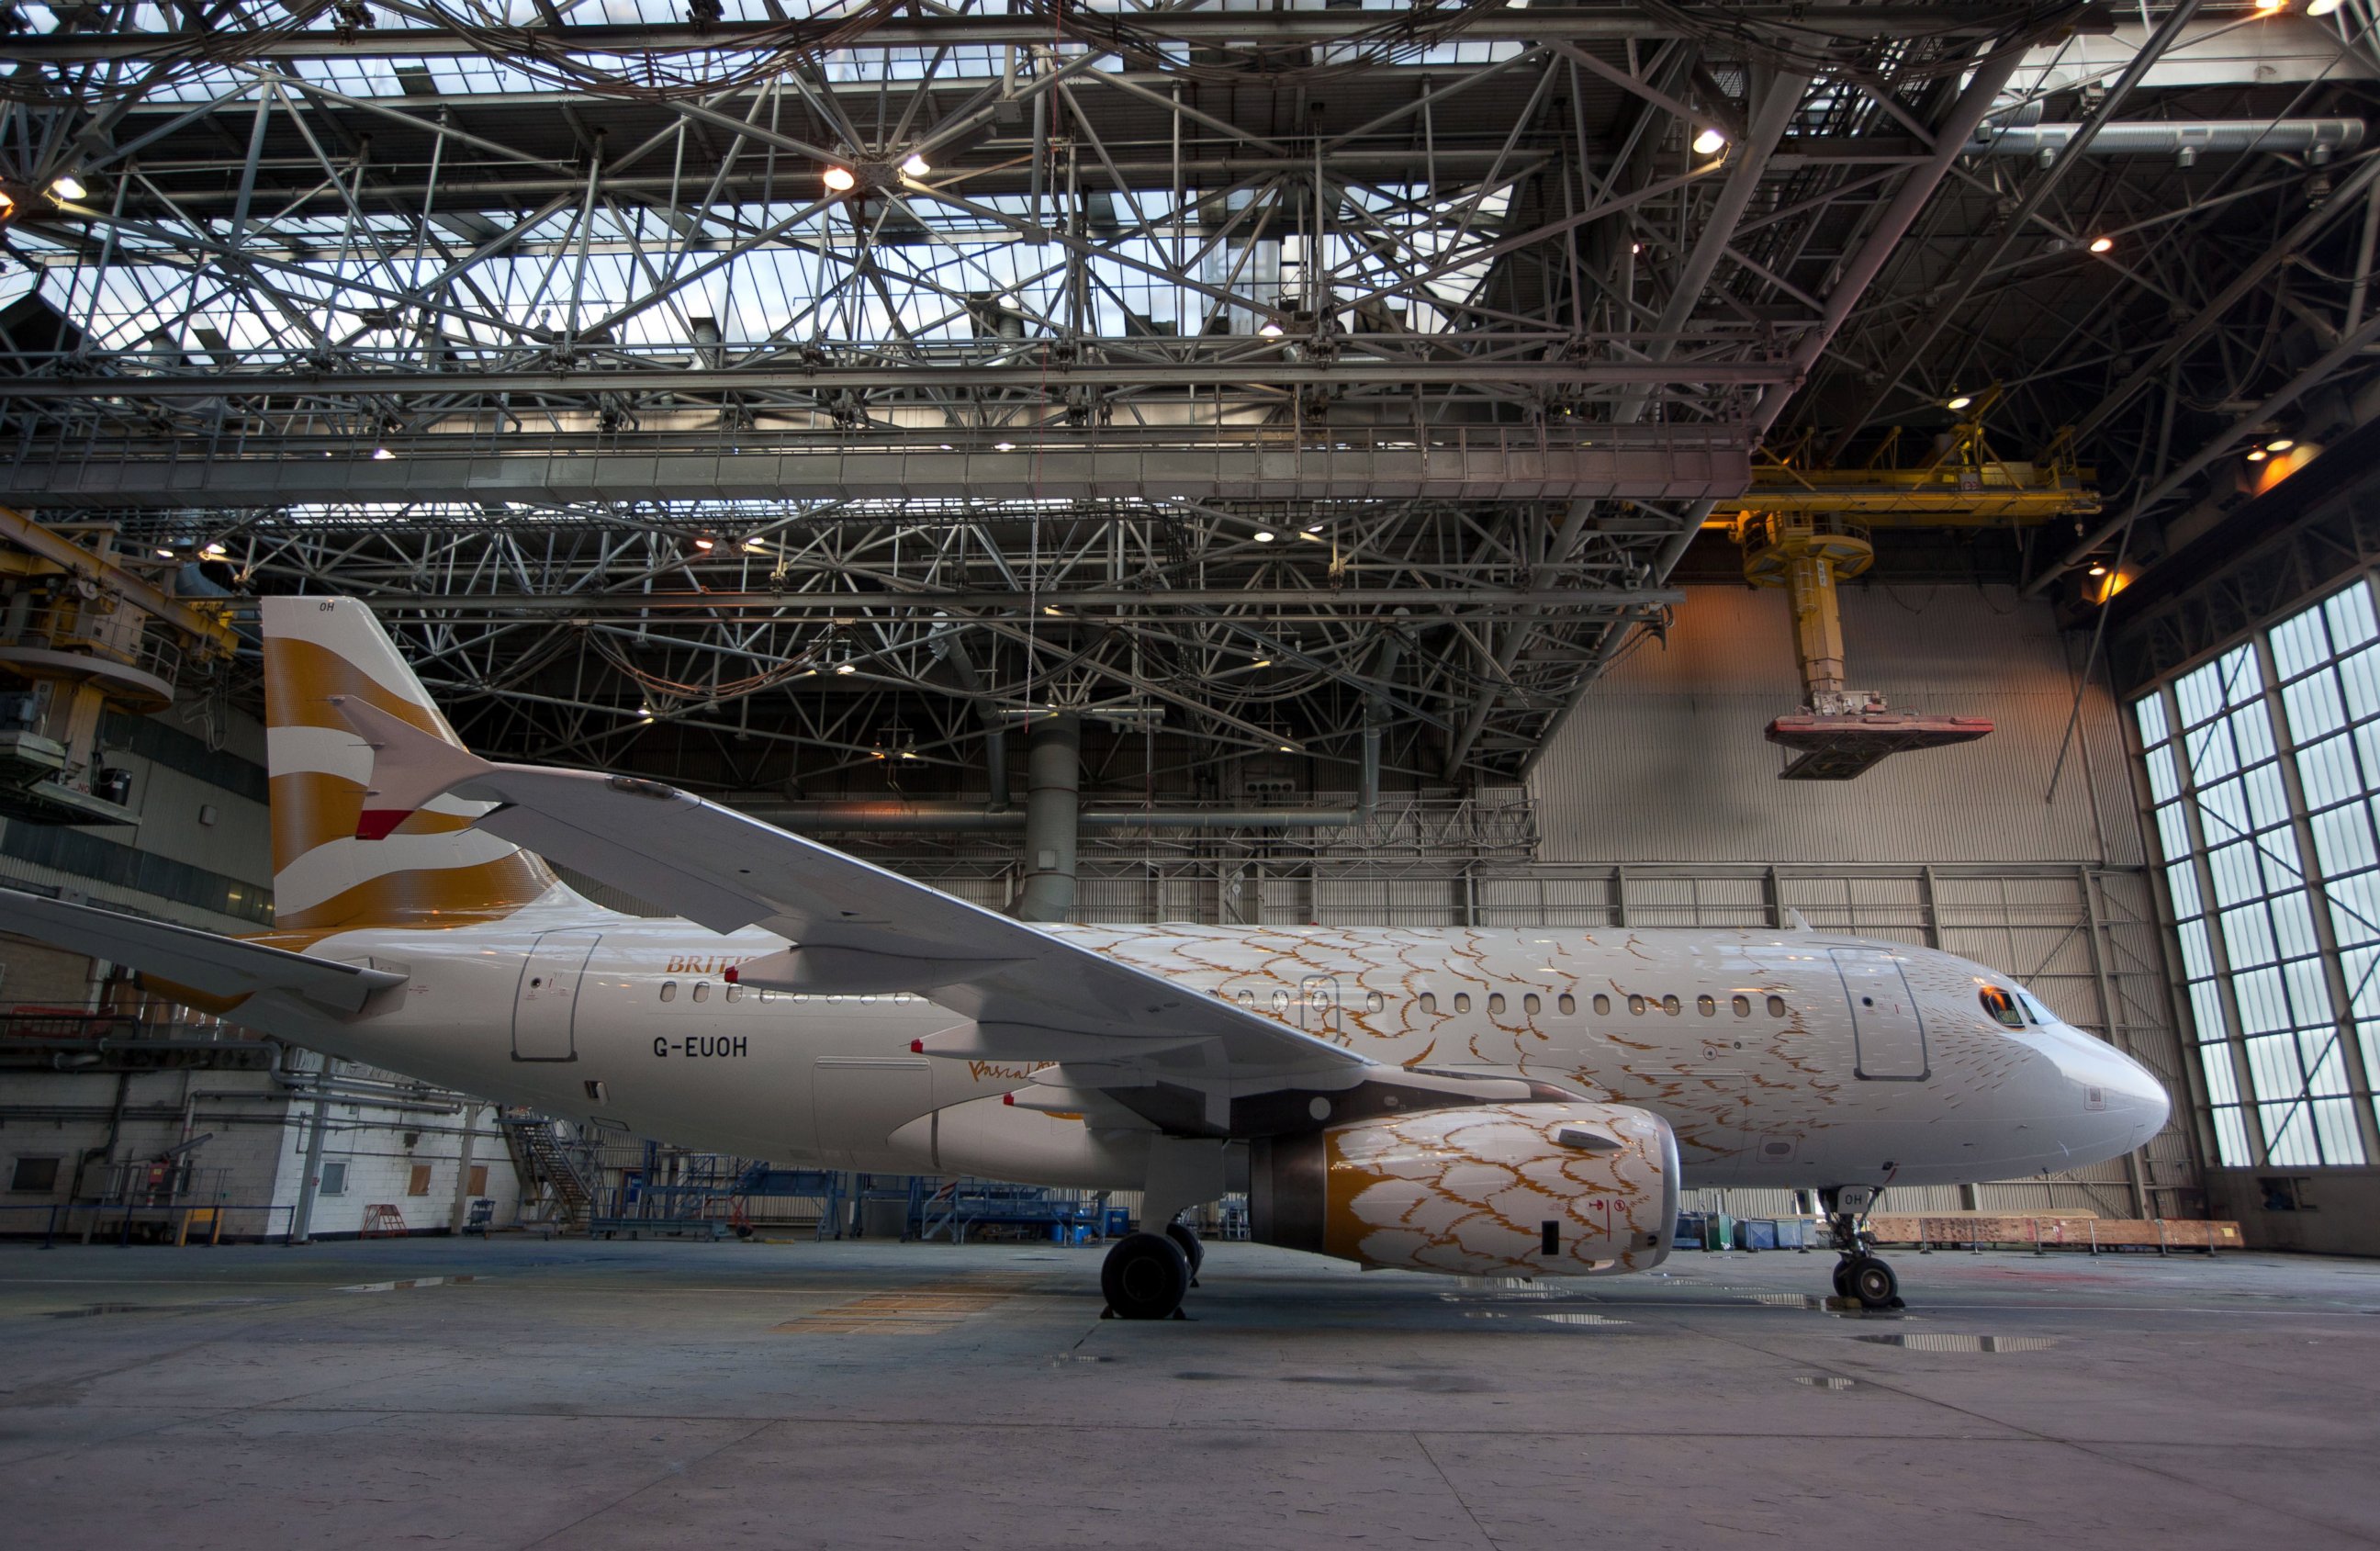 PHOTO: A British Airways Airbus A319 aircraft displaying 'The Dove' celebratory Olympics livery stands in a hangar at Heathrow airport in London, April 3, 2012.